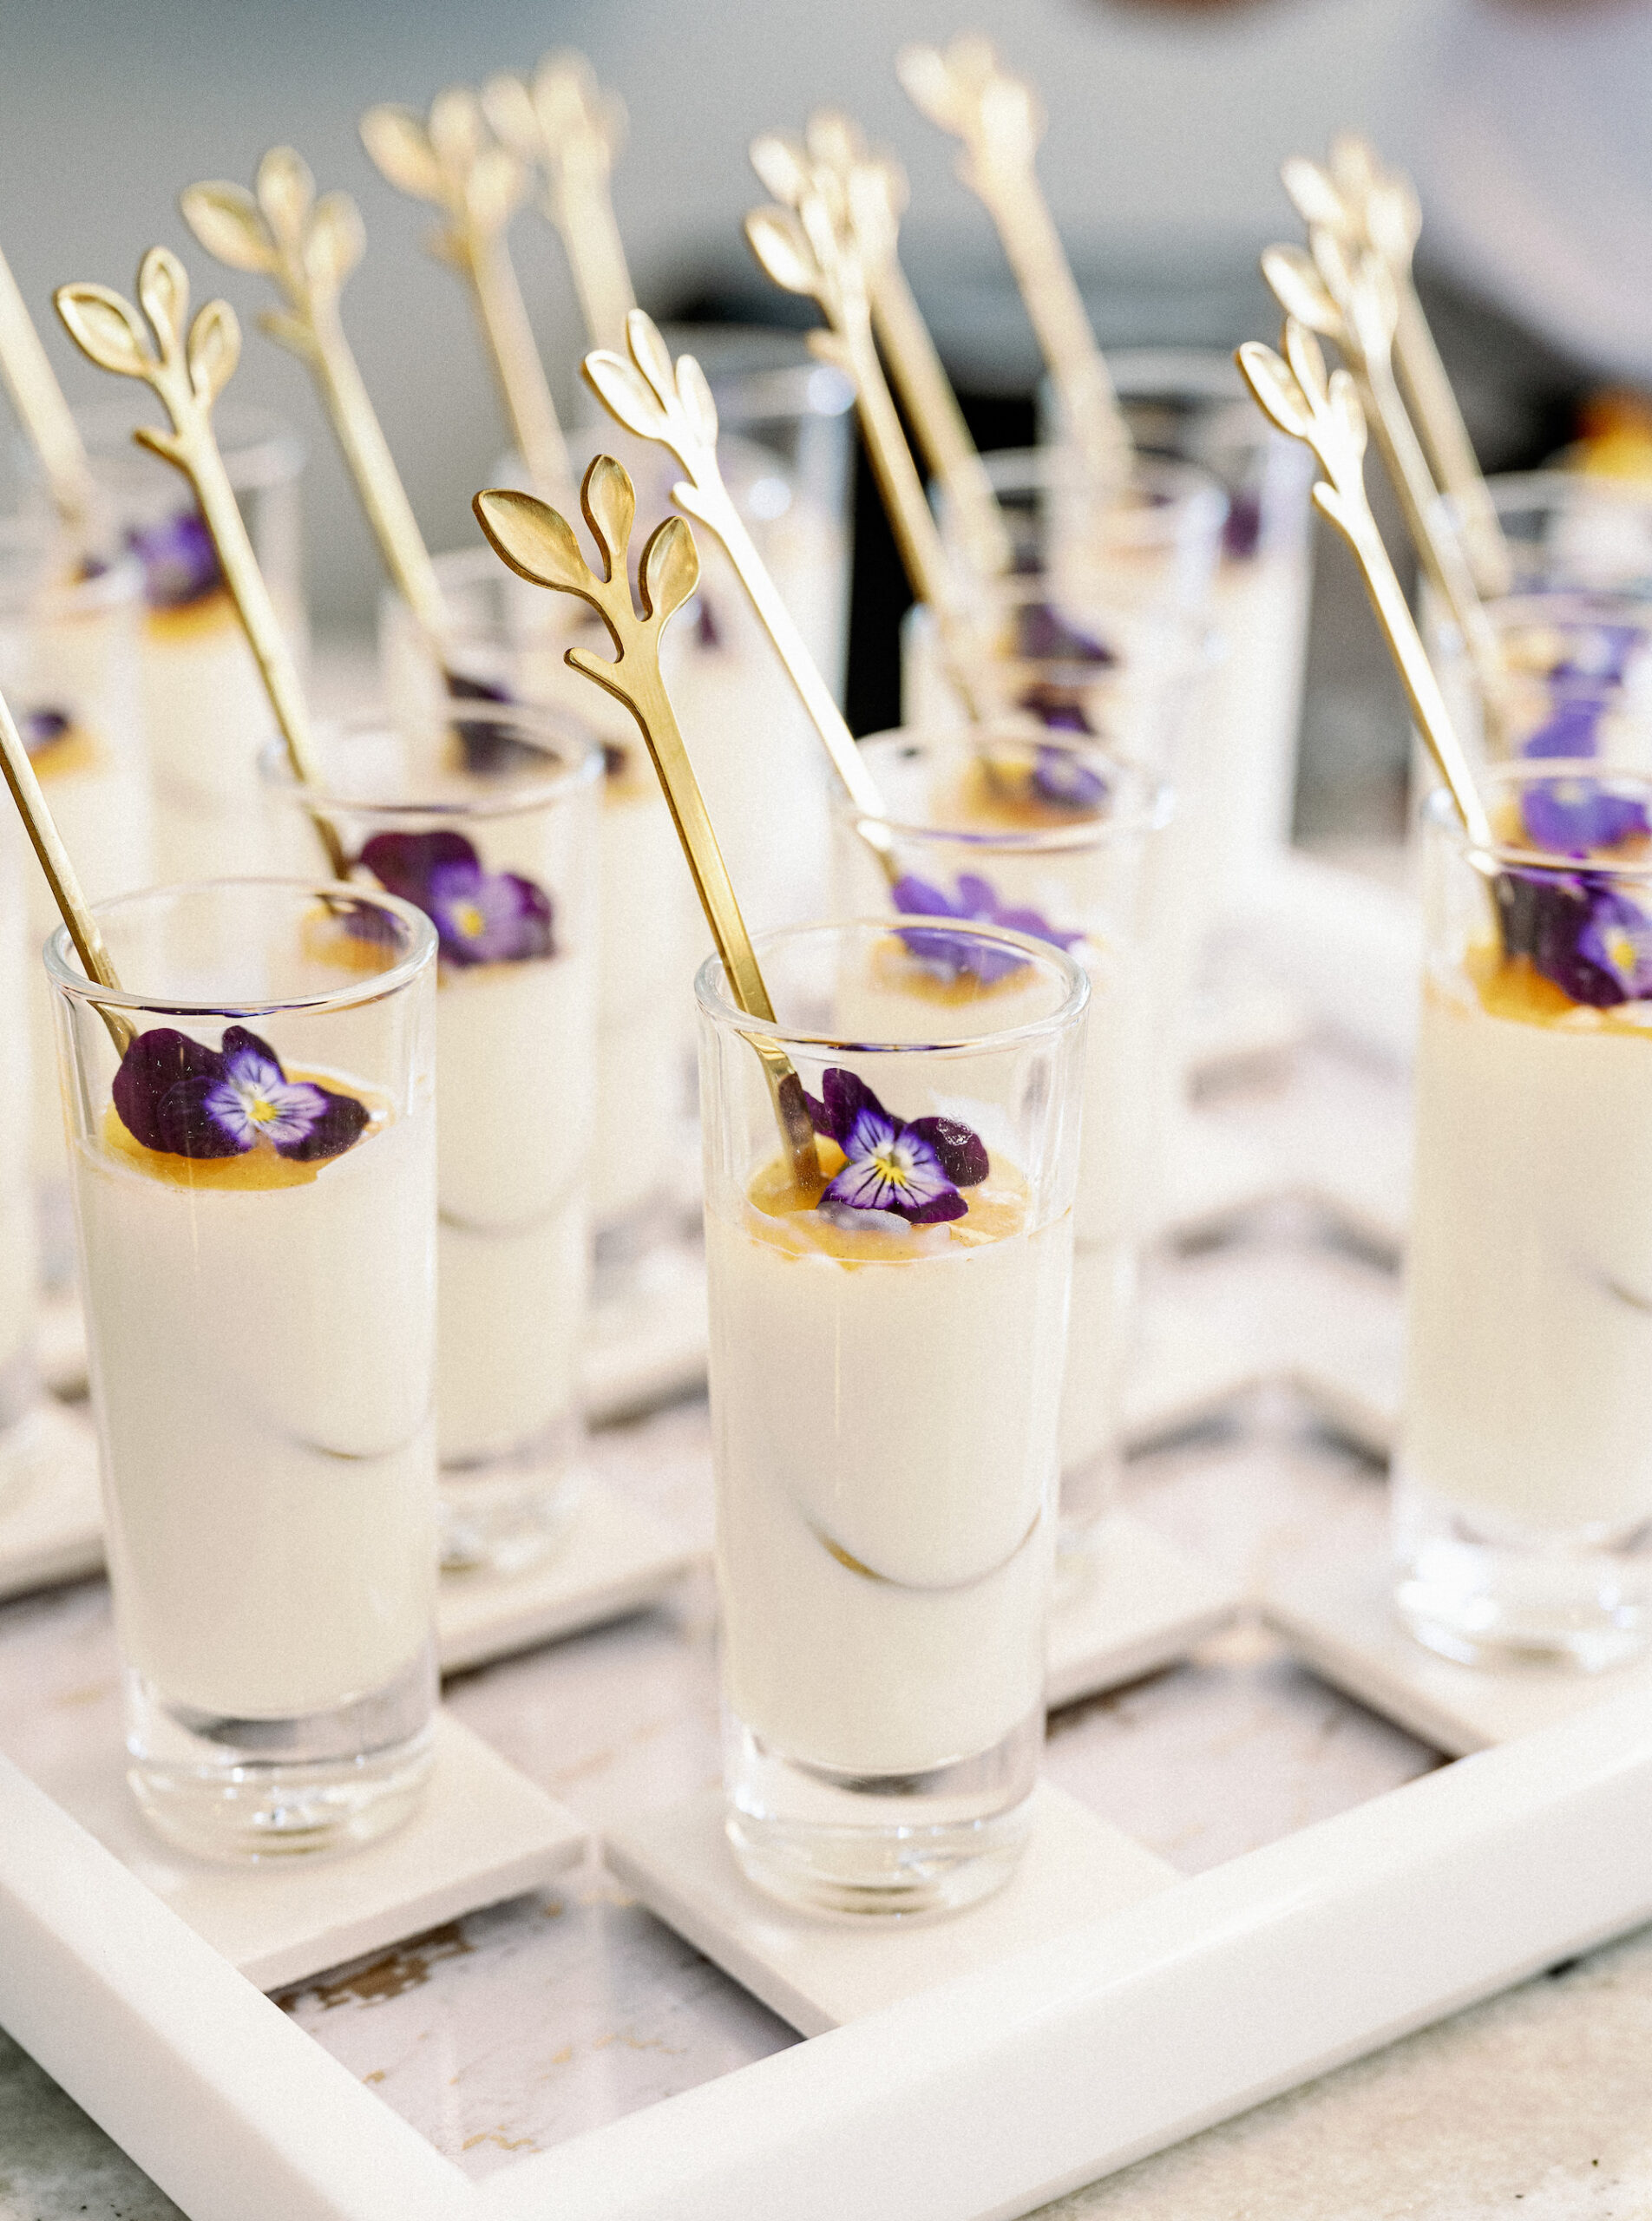 Tampa Bay Catering Company Elite Events Catering | Dewitt for Love Photography | Dessert Shooters